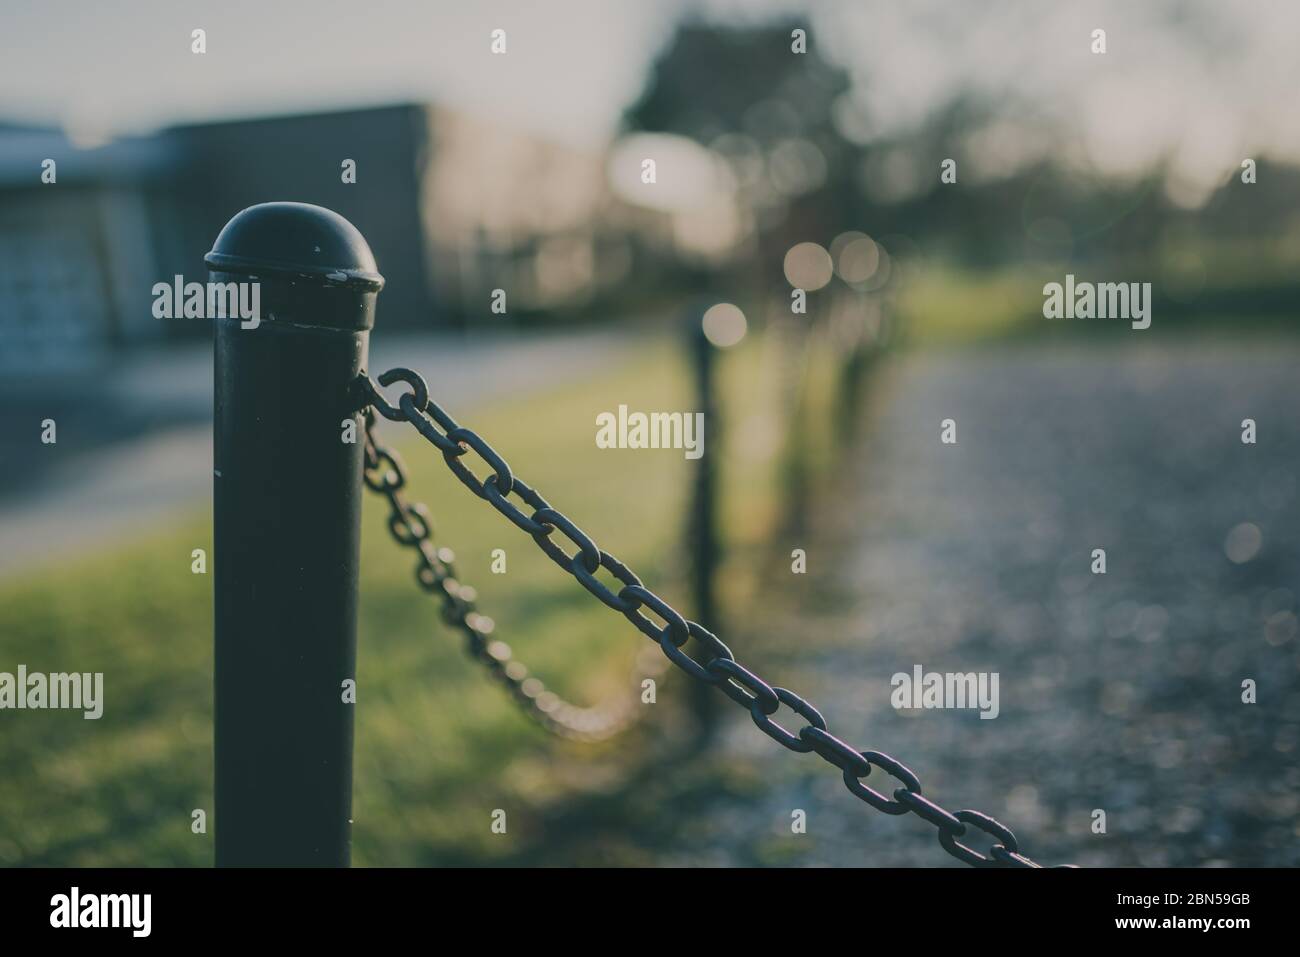 Black fence with chains and pillars with intentional blurred background Stock Photo